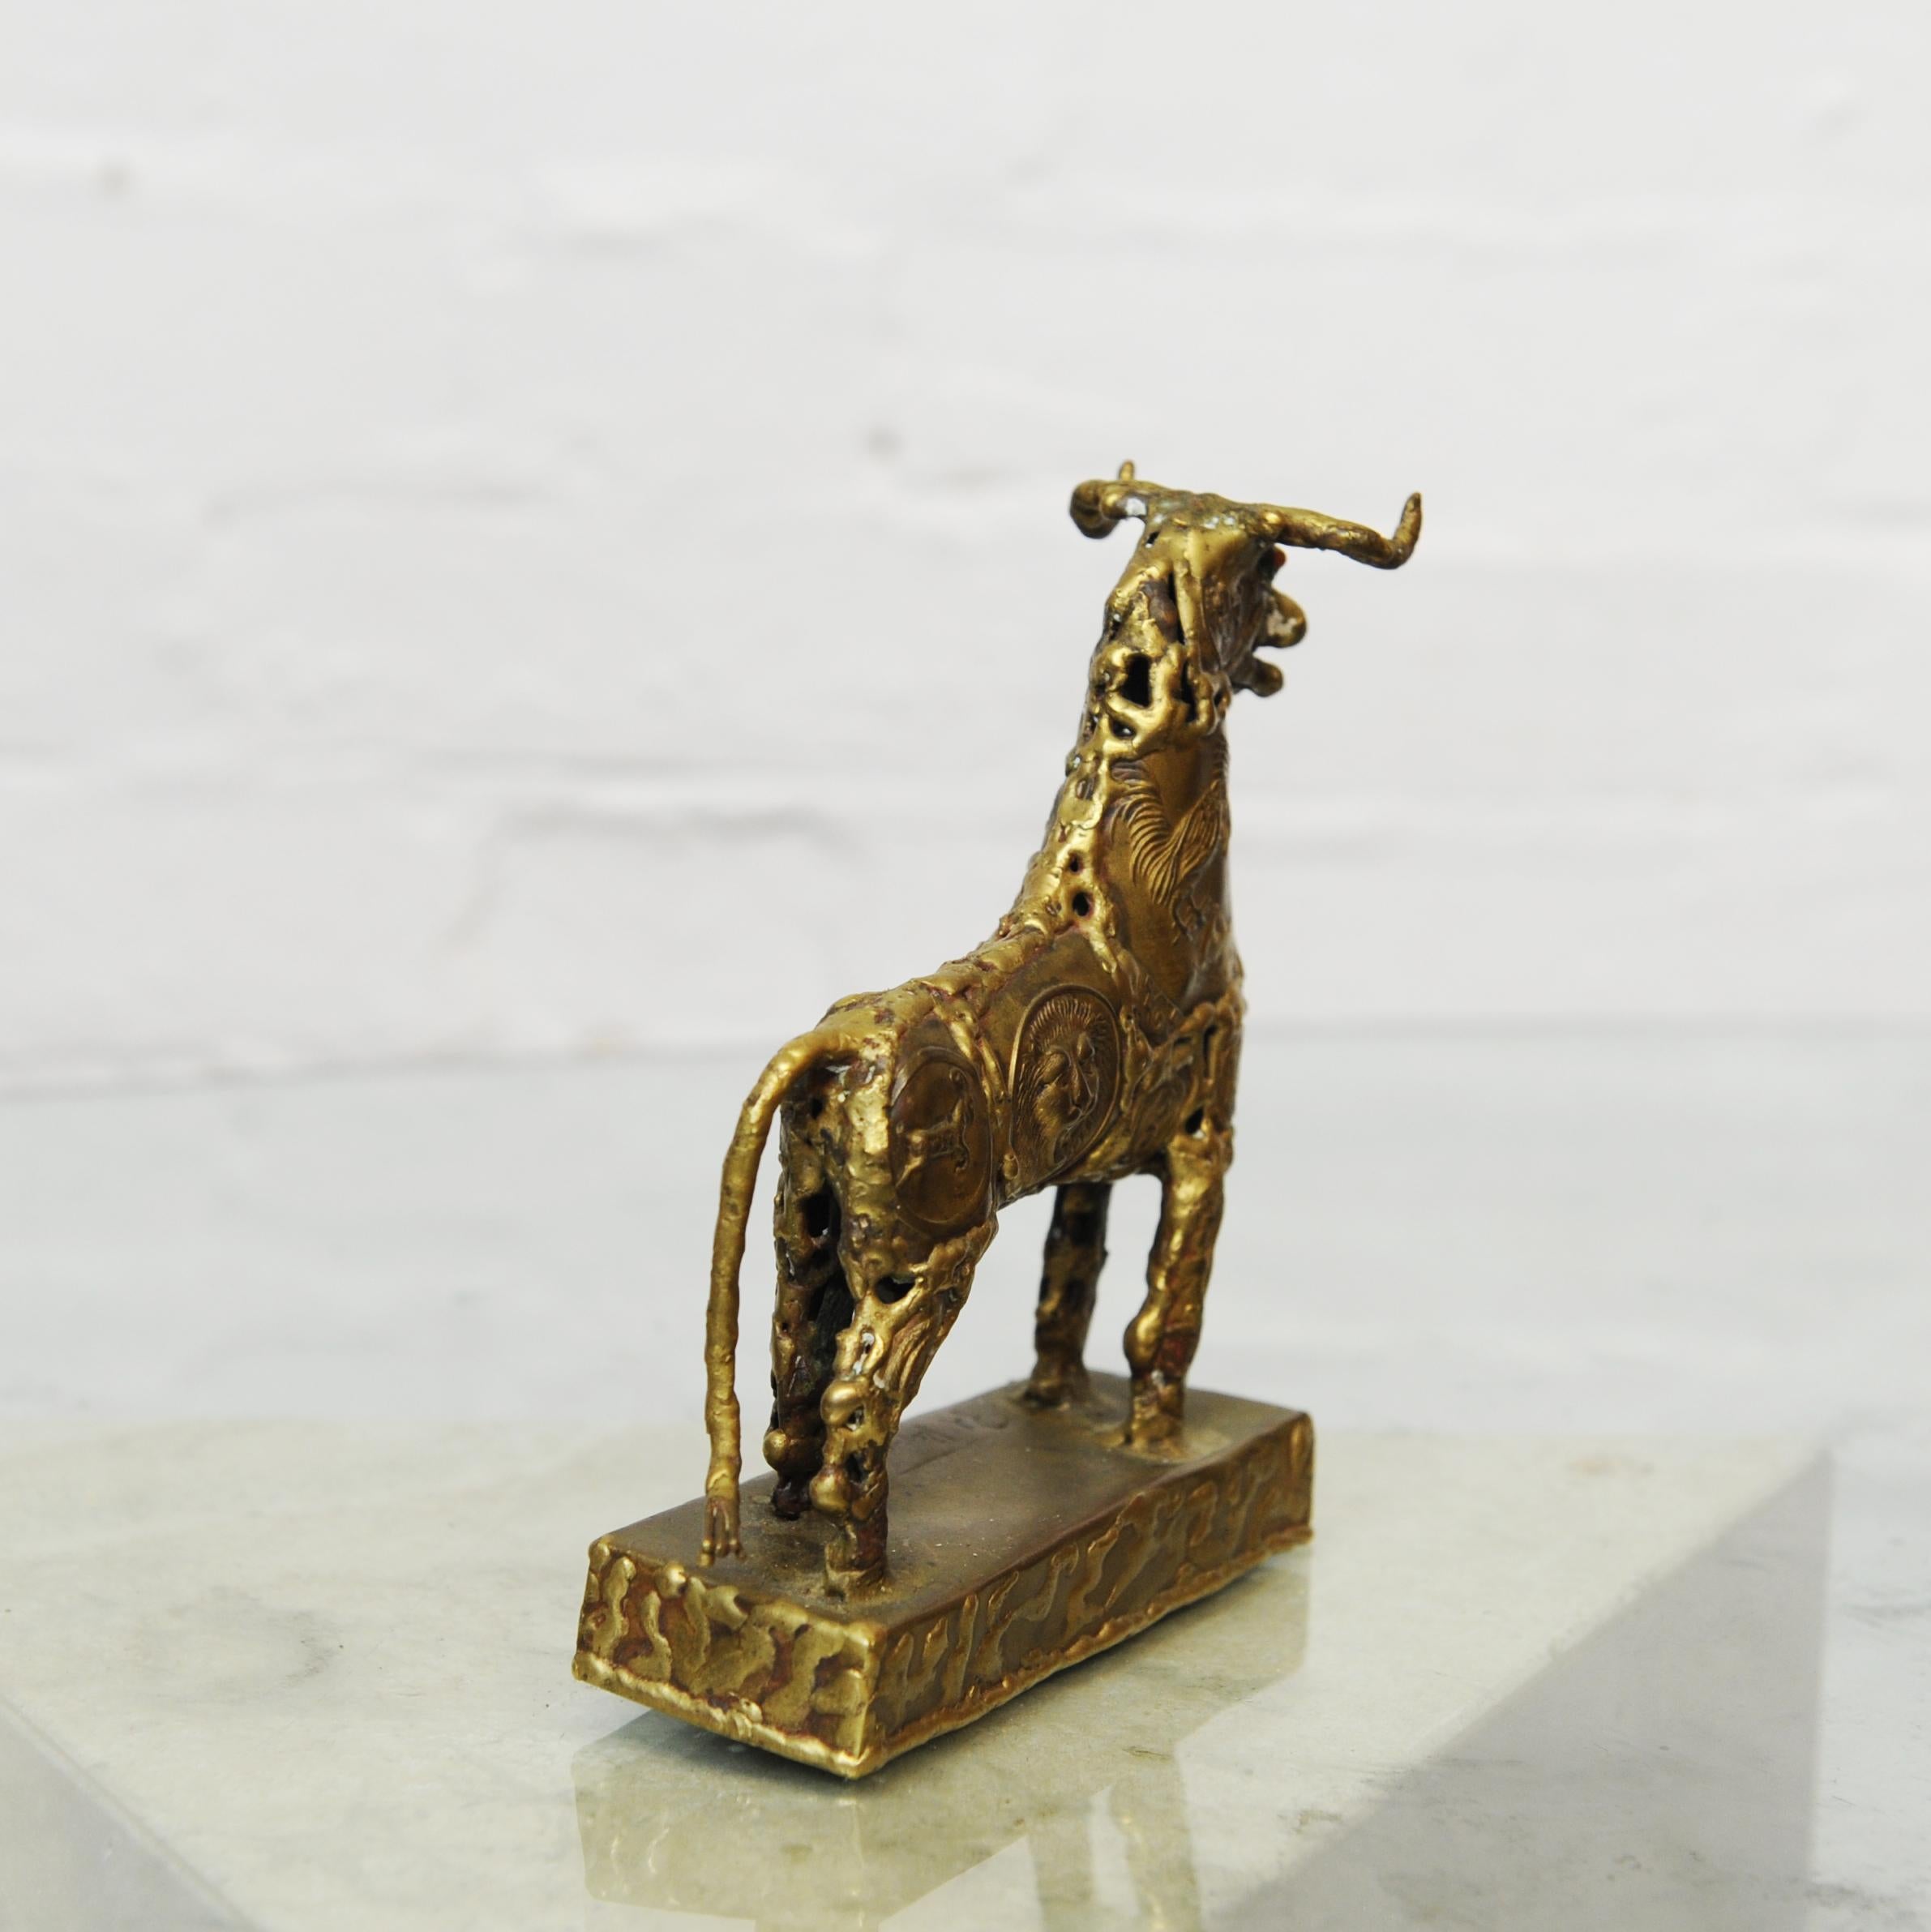 Brutalist Metal Sculpture of a Brass Bull by Pal Kepenyes, 1970s For Sale 3